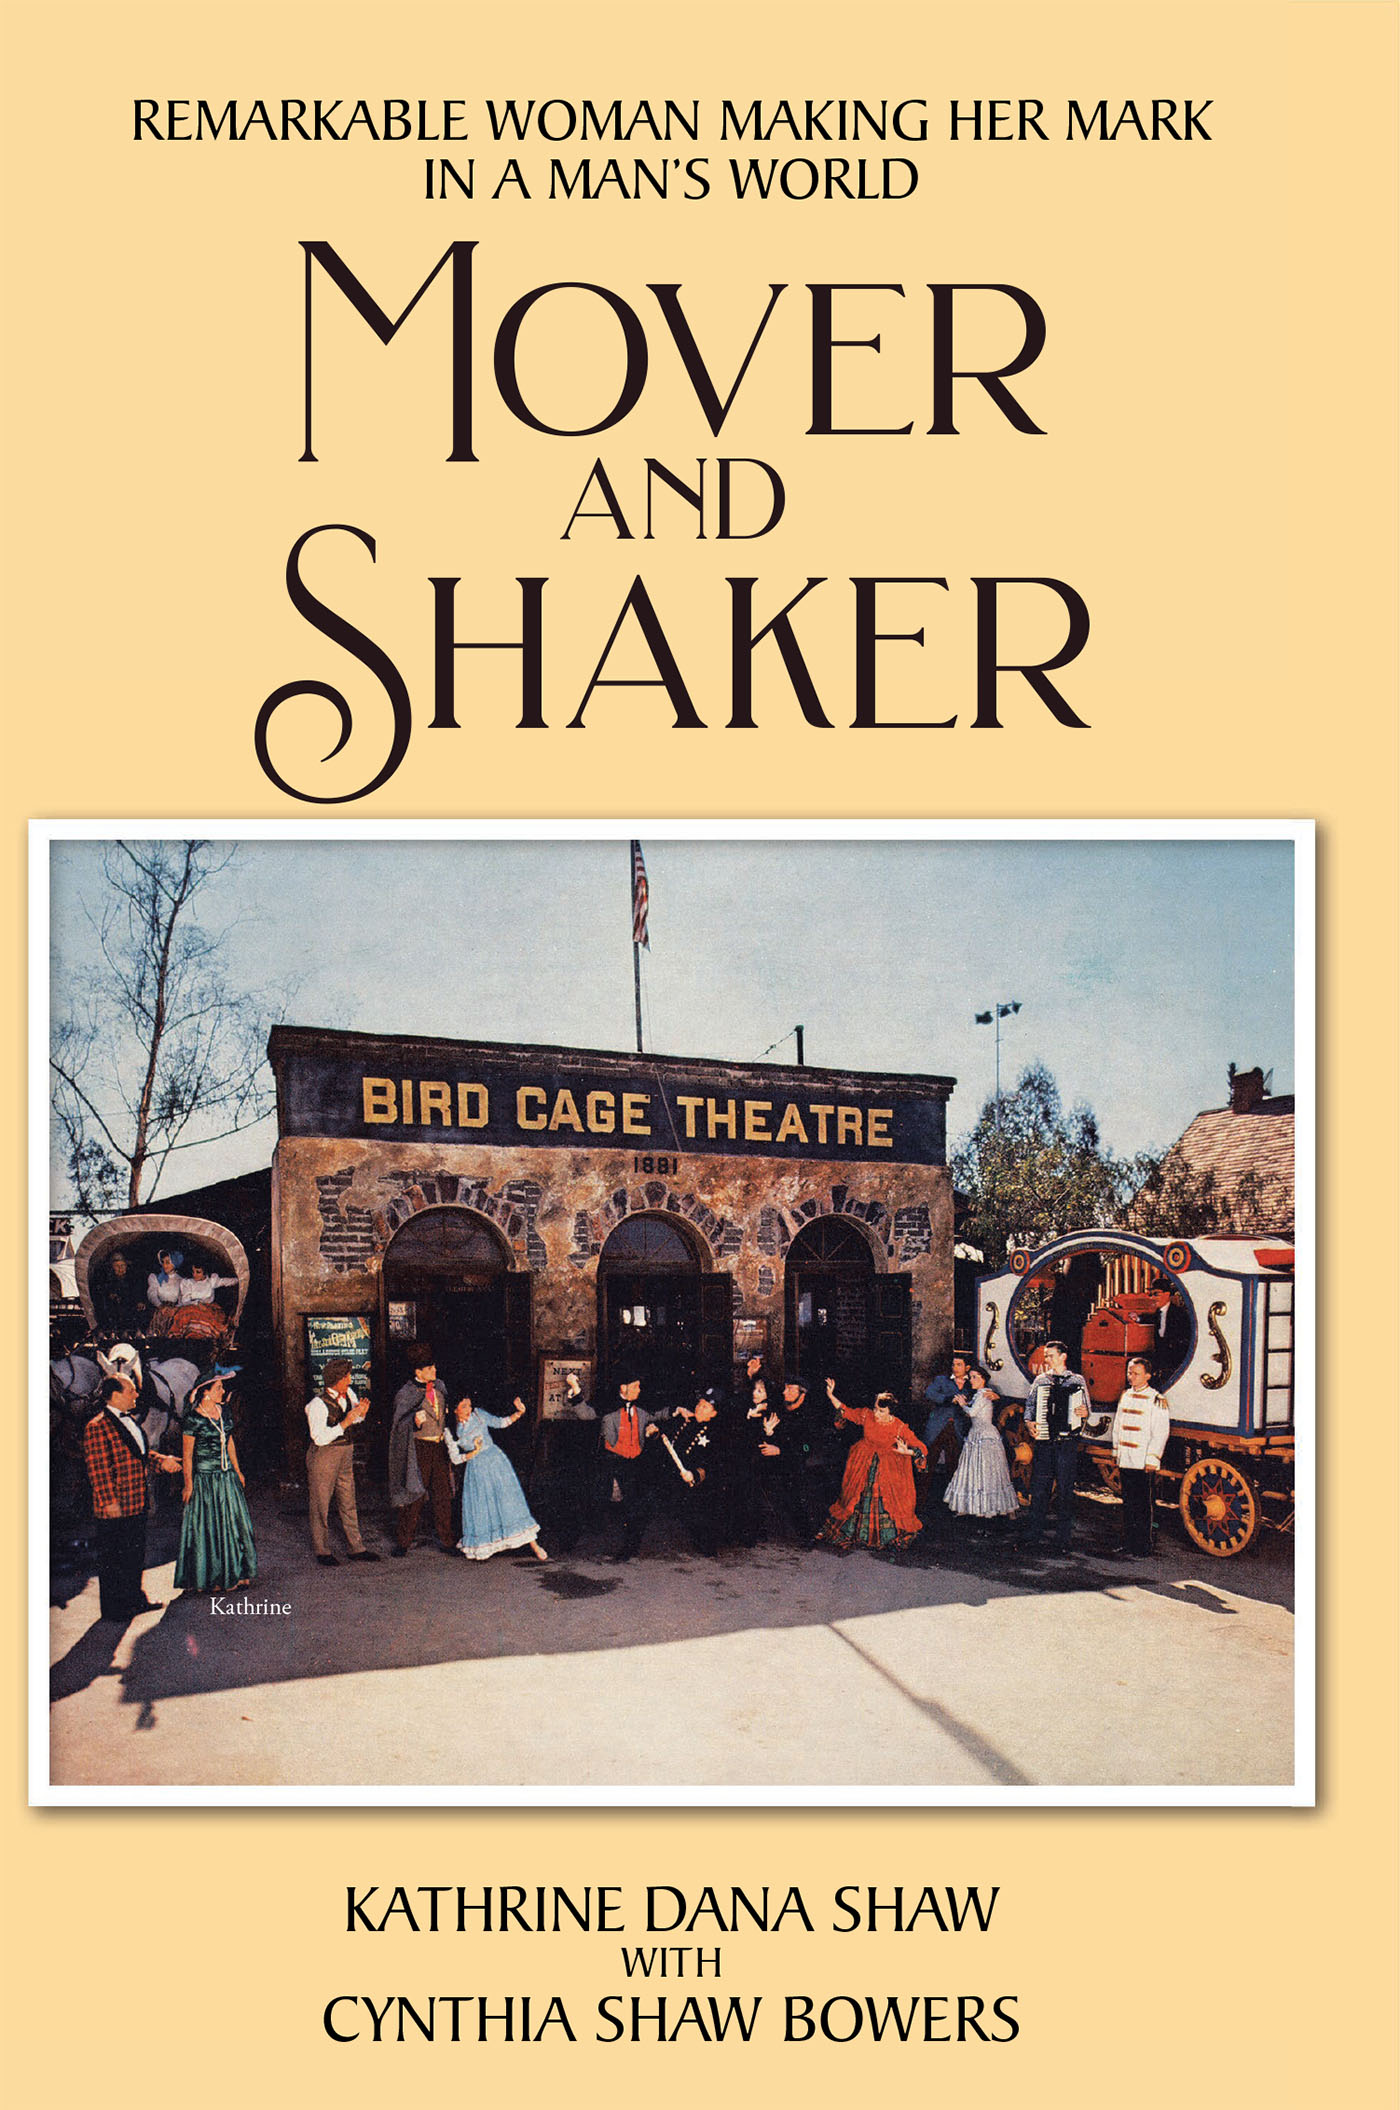 Kathrine Dana Shaw with Cynthia Shaw Bowers’s Newly Released "Mover and Shaker" is a Fascinating Memoir That Presents a Surprising and Colorful Life